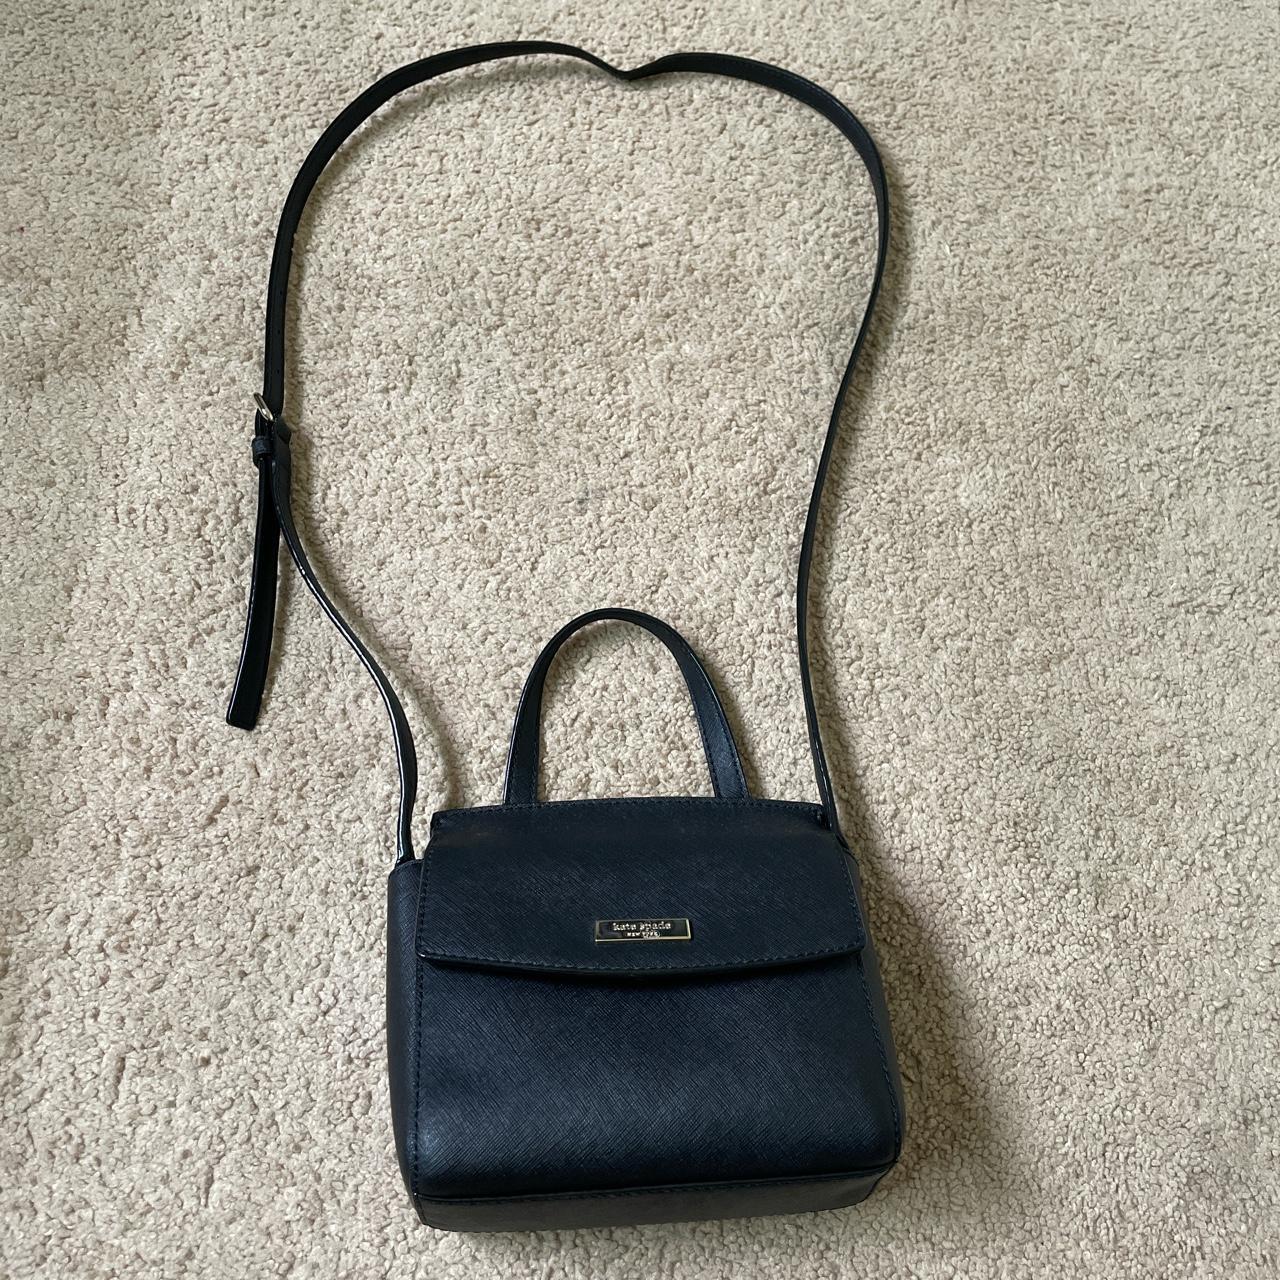 kate spade crossbody black purse small and cute for - Depop